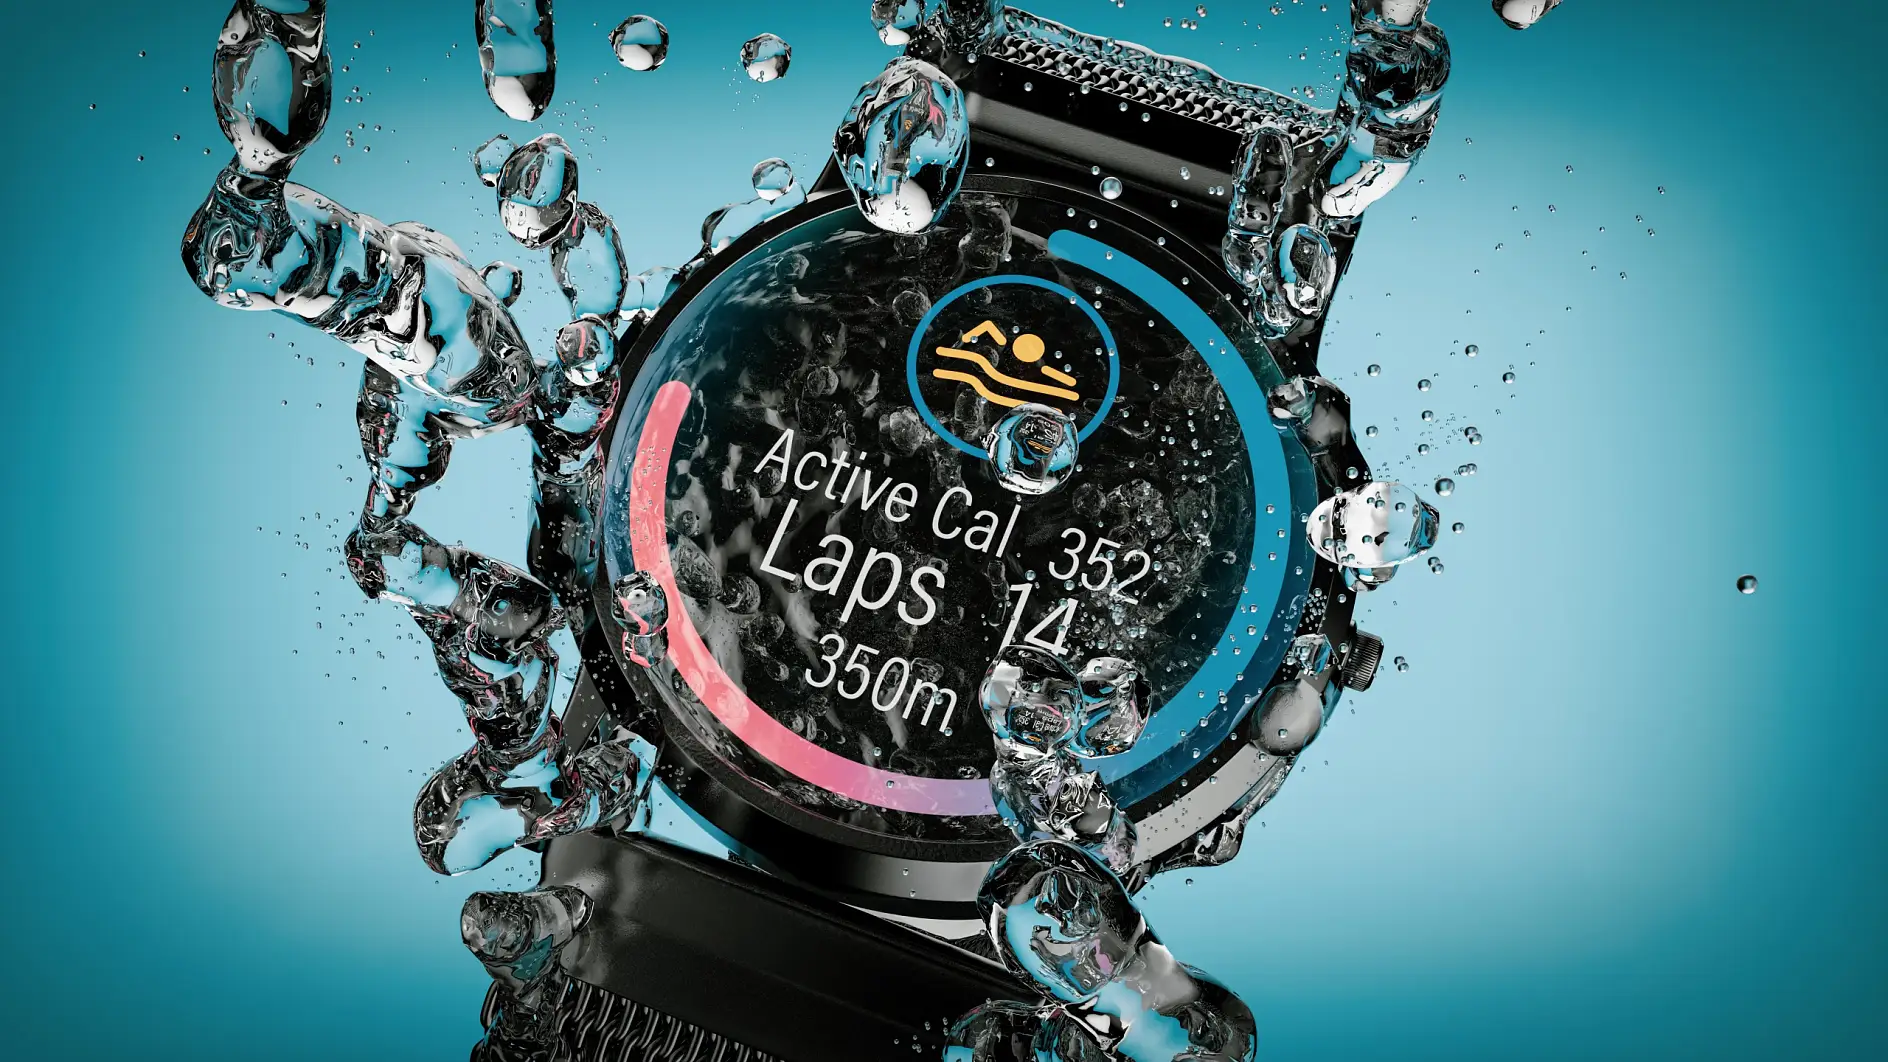 tesa_Electronics_Smartwatch-with-waterdrops